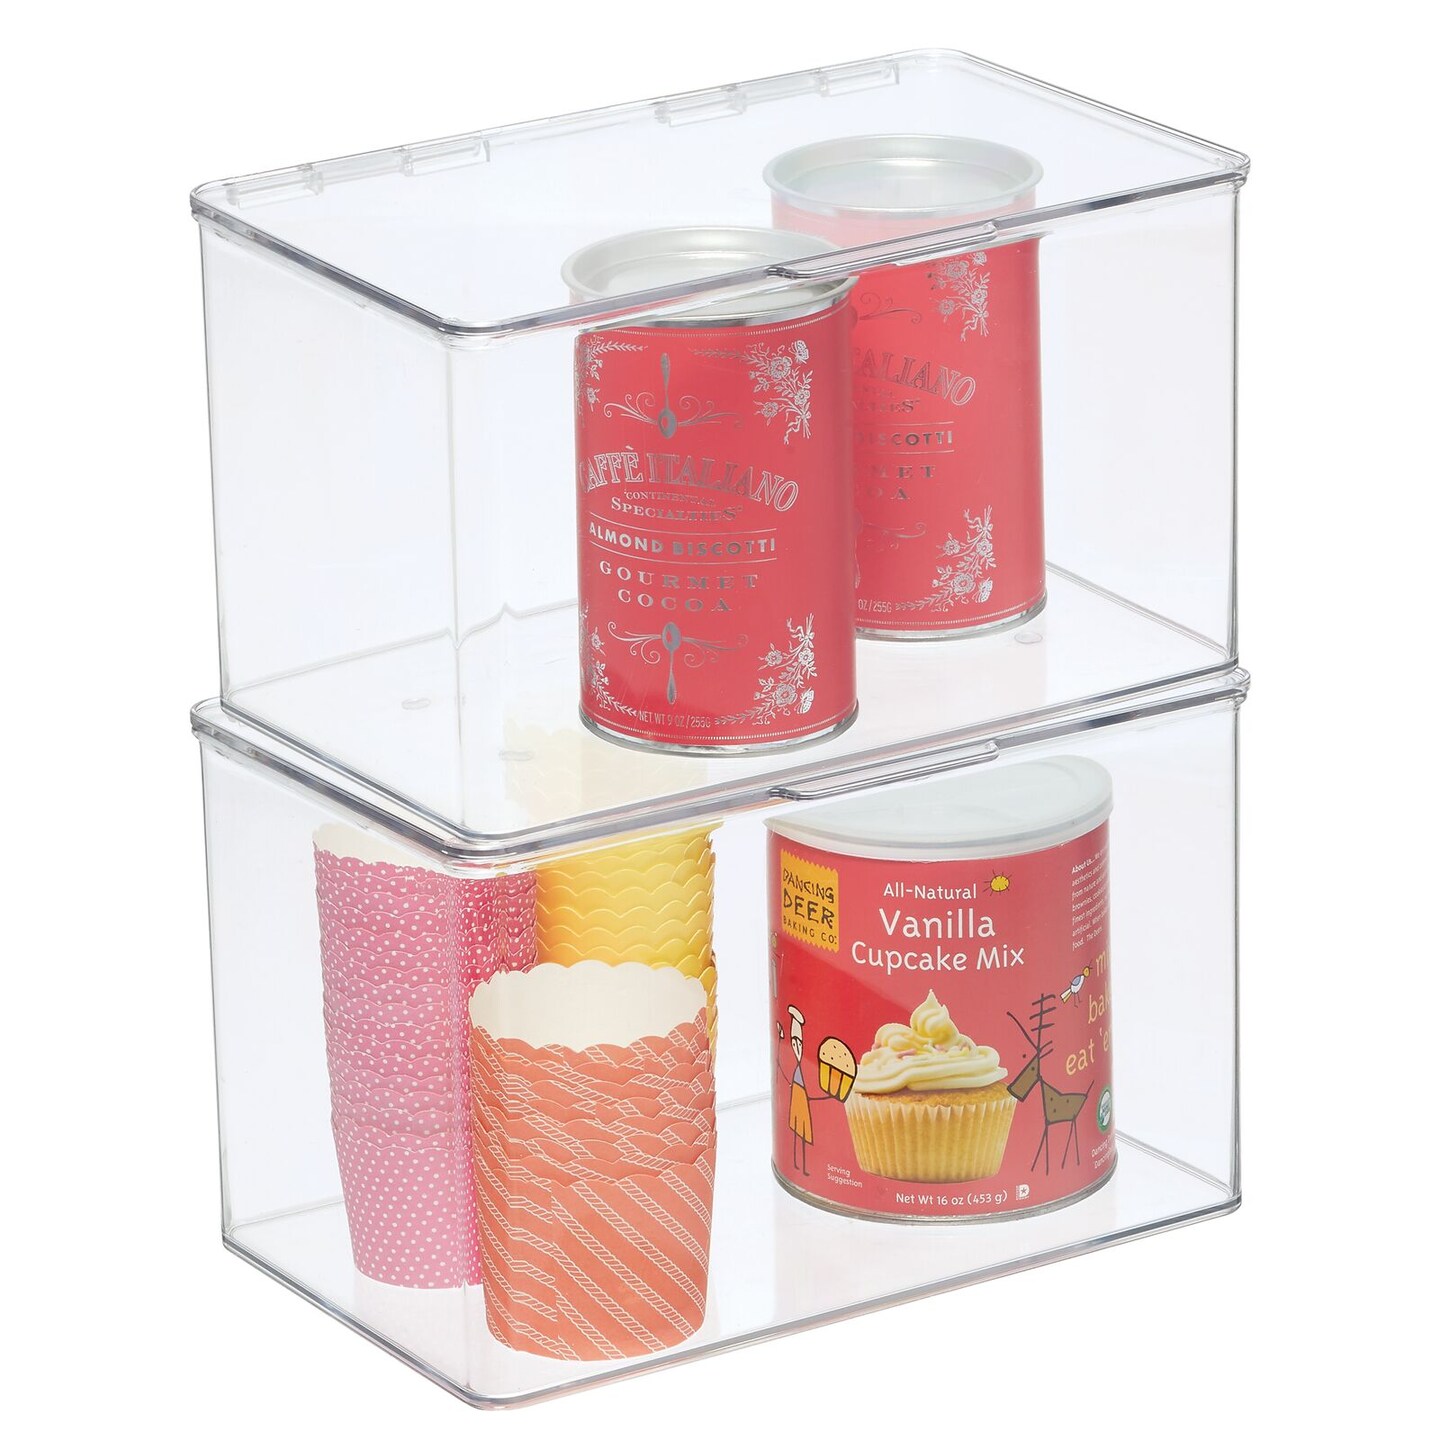 mDesign mdesign plastic stackable food storage container bin with